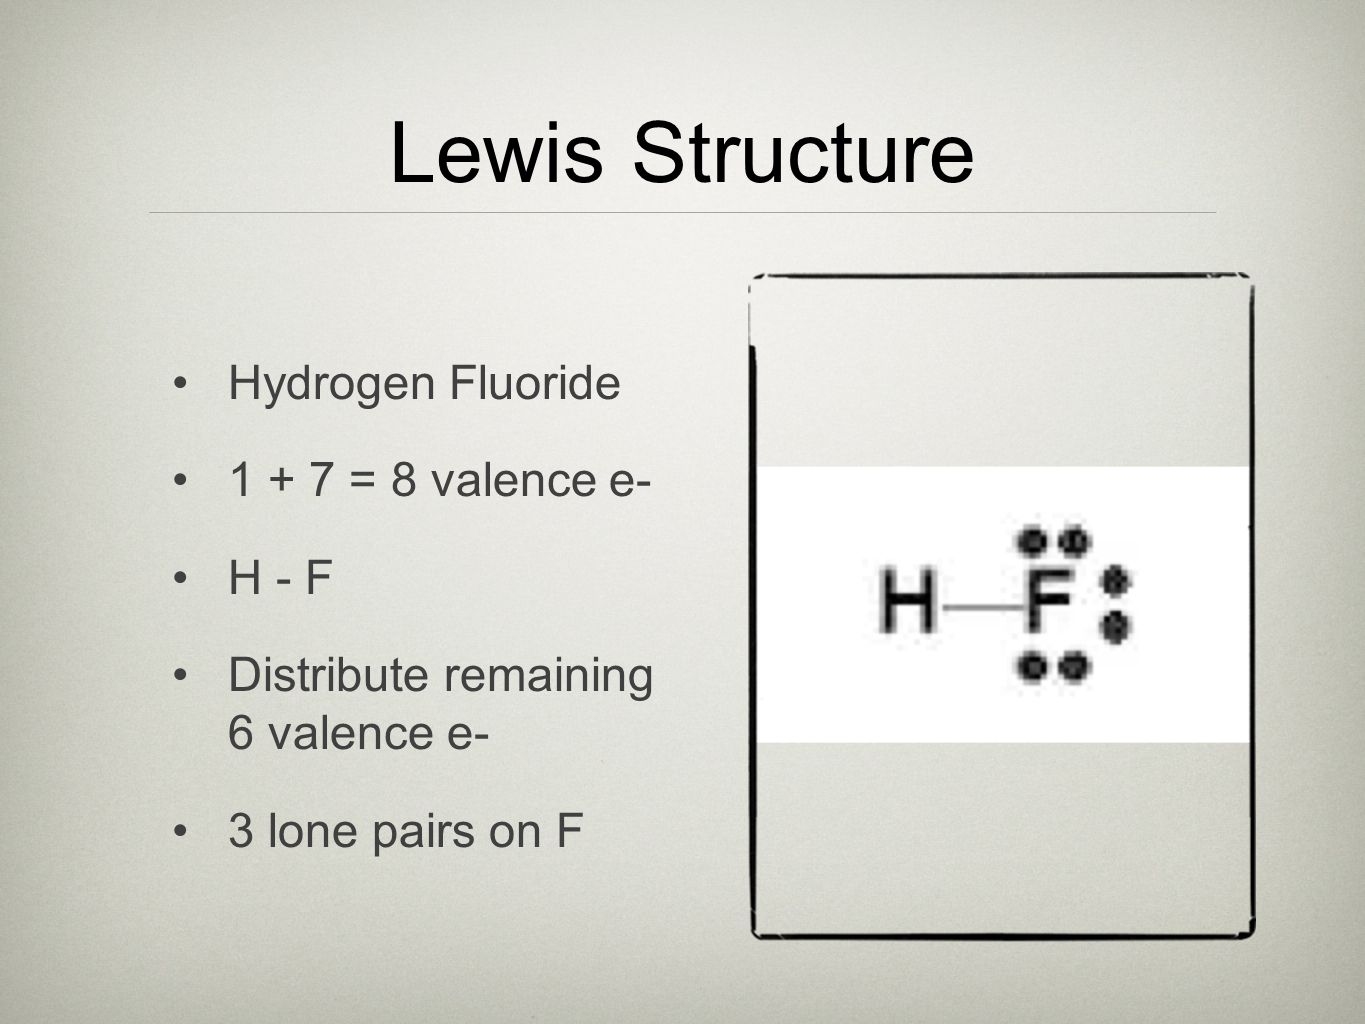 Lewis Structure Hydrogen Fluoride = 8 valence e- H - F Distribute remaining 6 valence e- 3 lone pairs on F